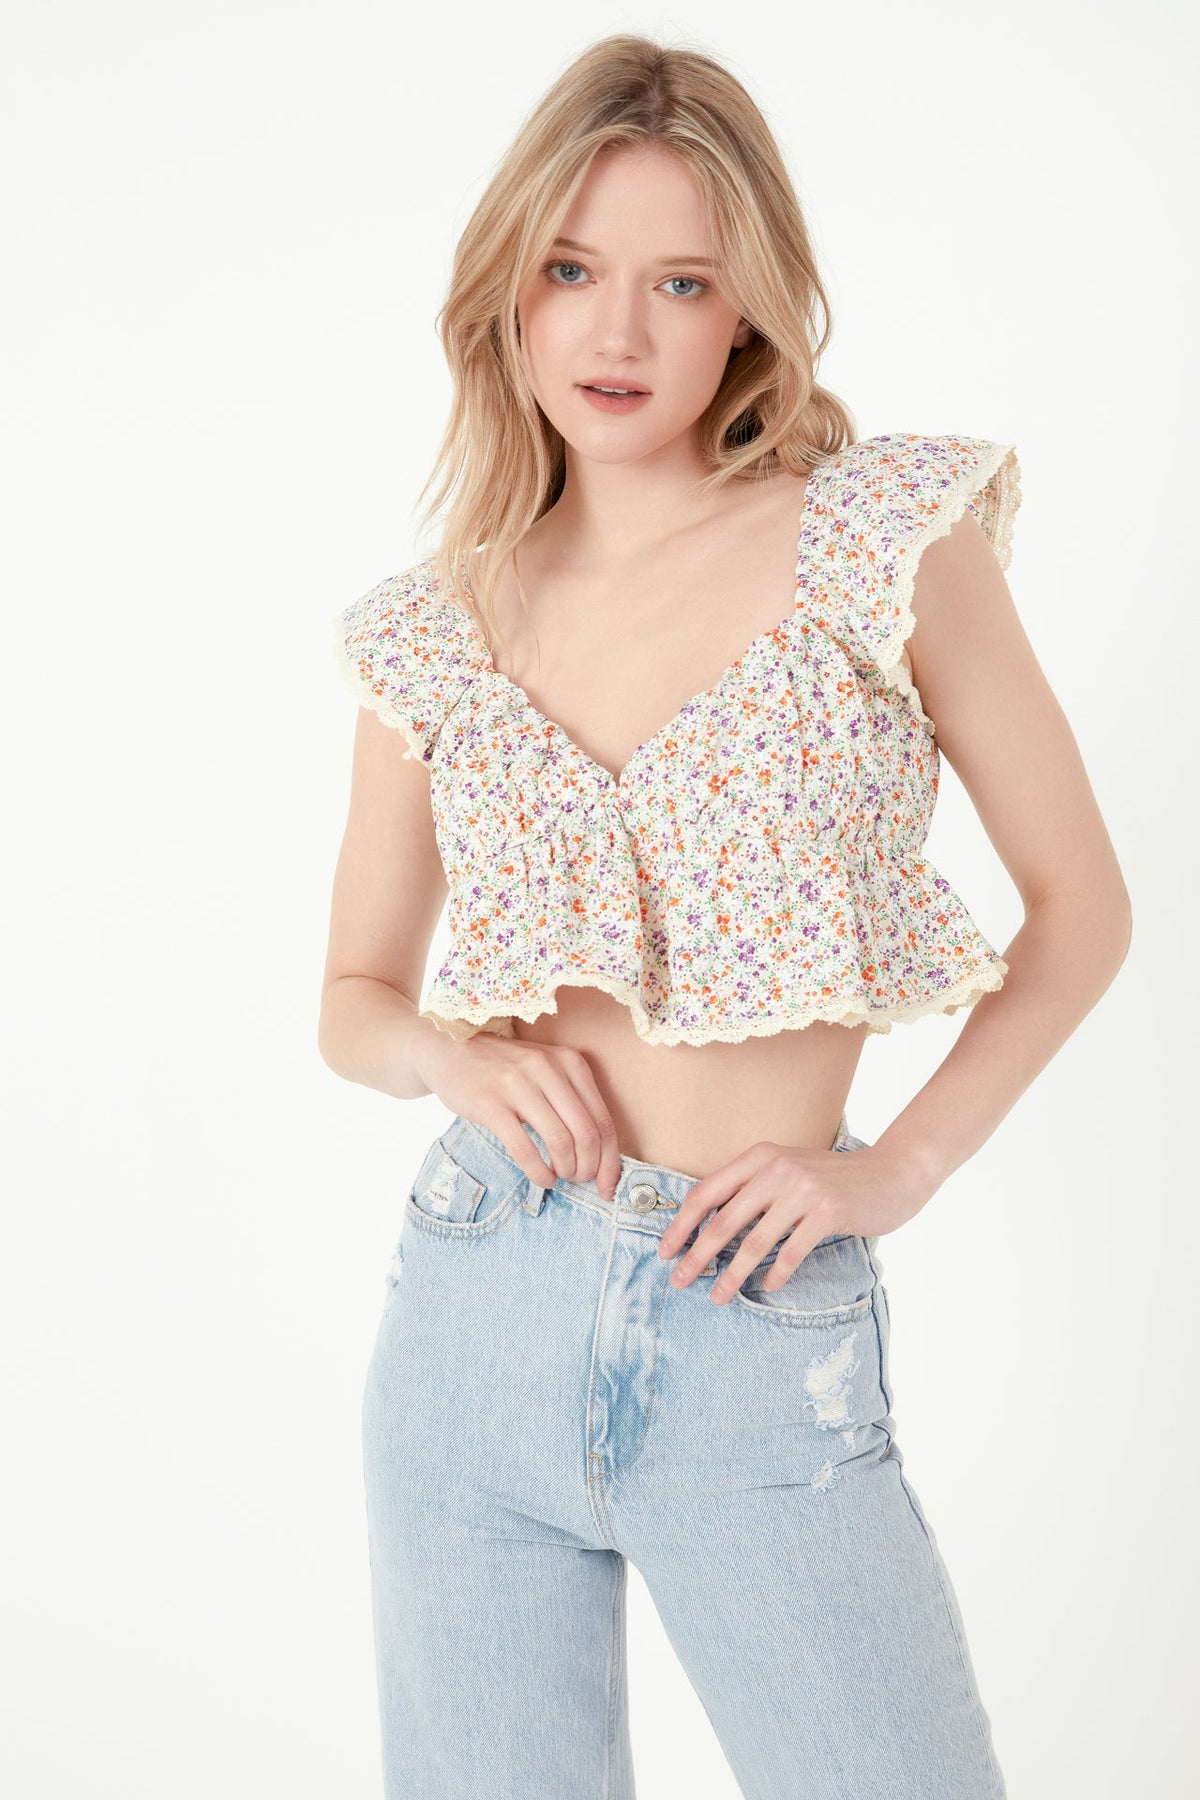 FREE THE ROSES - Embroidered Ruffled Bandeau Top - TOPS available at Objectrare